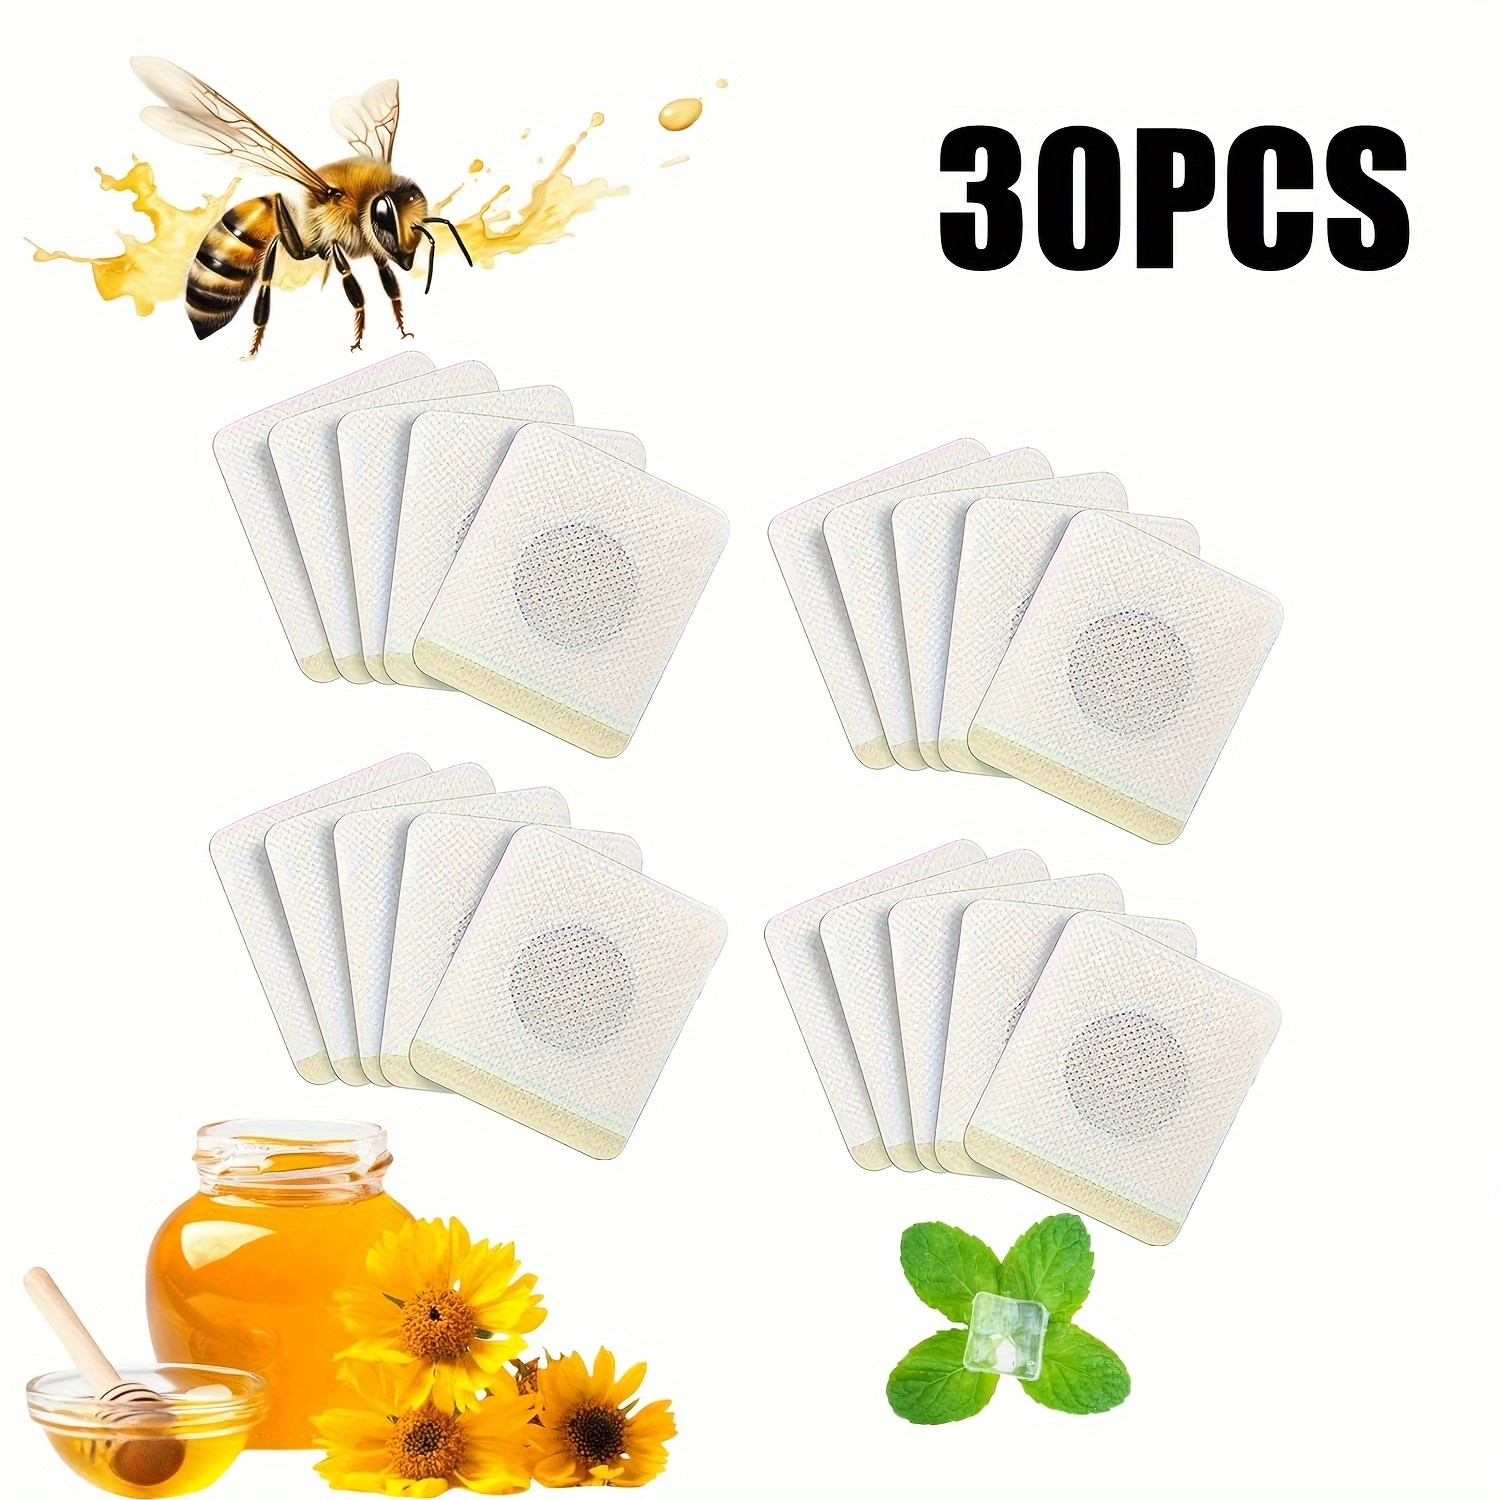 

30pcs Bubchen Bee Drainage Patches With Artemisia And Calendula Extracts, Hypoallergenic Shaping And Belly Stickers, Natural Ingredients For Body Contouring And Wellness